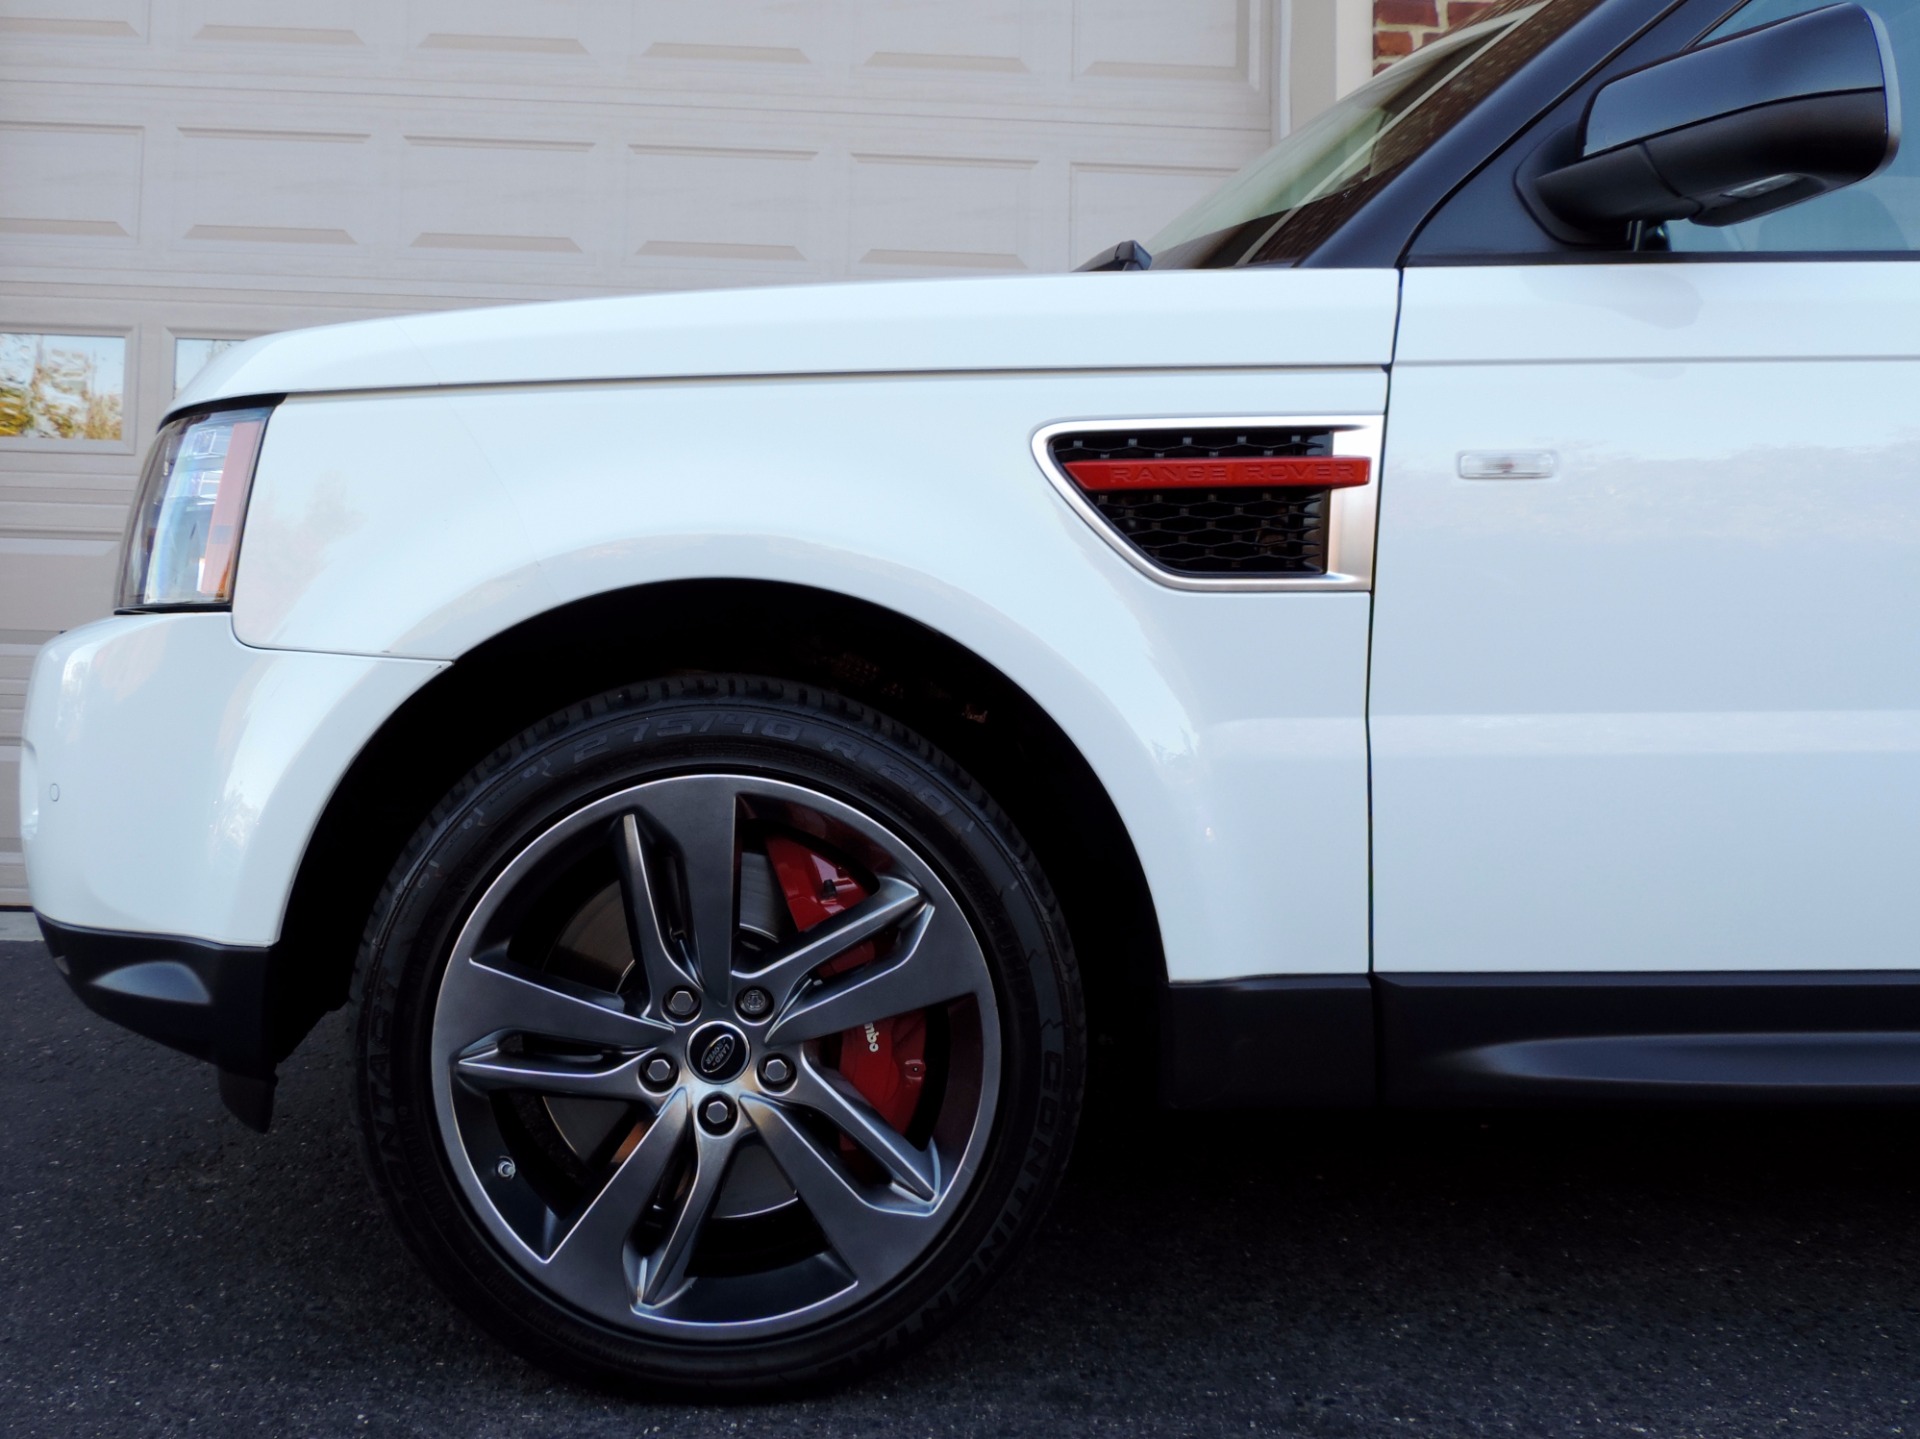 2013 Land Rover Range Rover Sport Supercharged Limited Edition Stock #  780367 for sale near Edgewater Park, NJ | NJ Land Rover Dealer